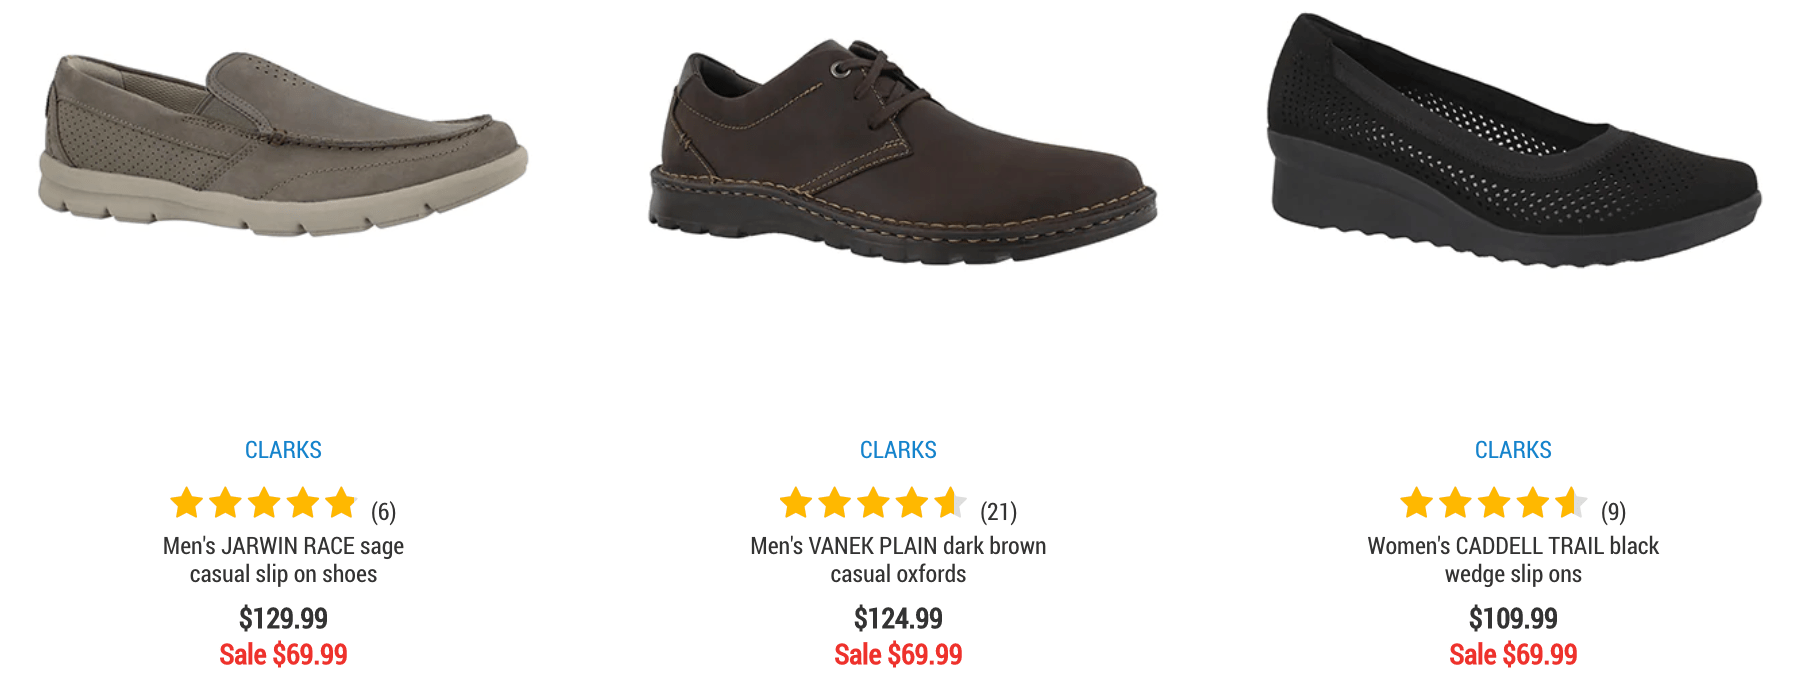 clarks shipping to canada